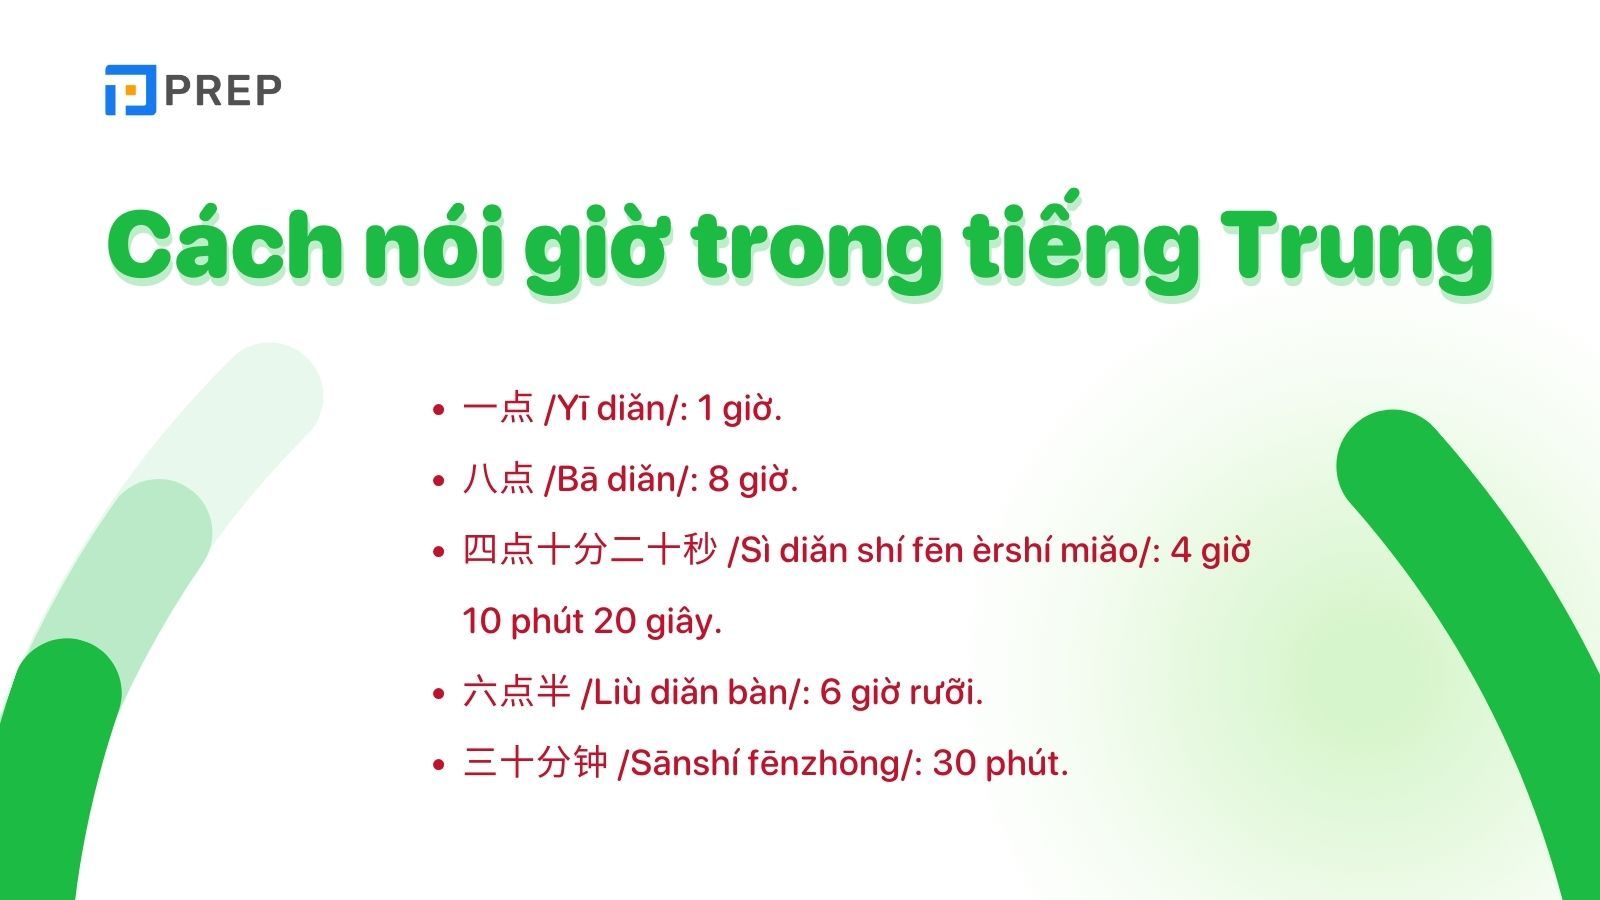 cach-noi-gio-trong-tieng-trung-chi-tiet.jpg